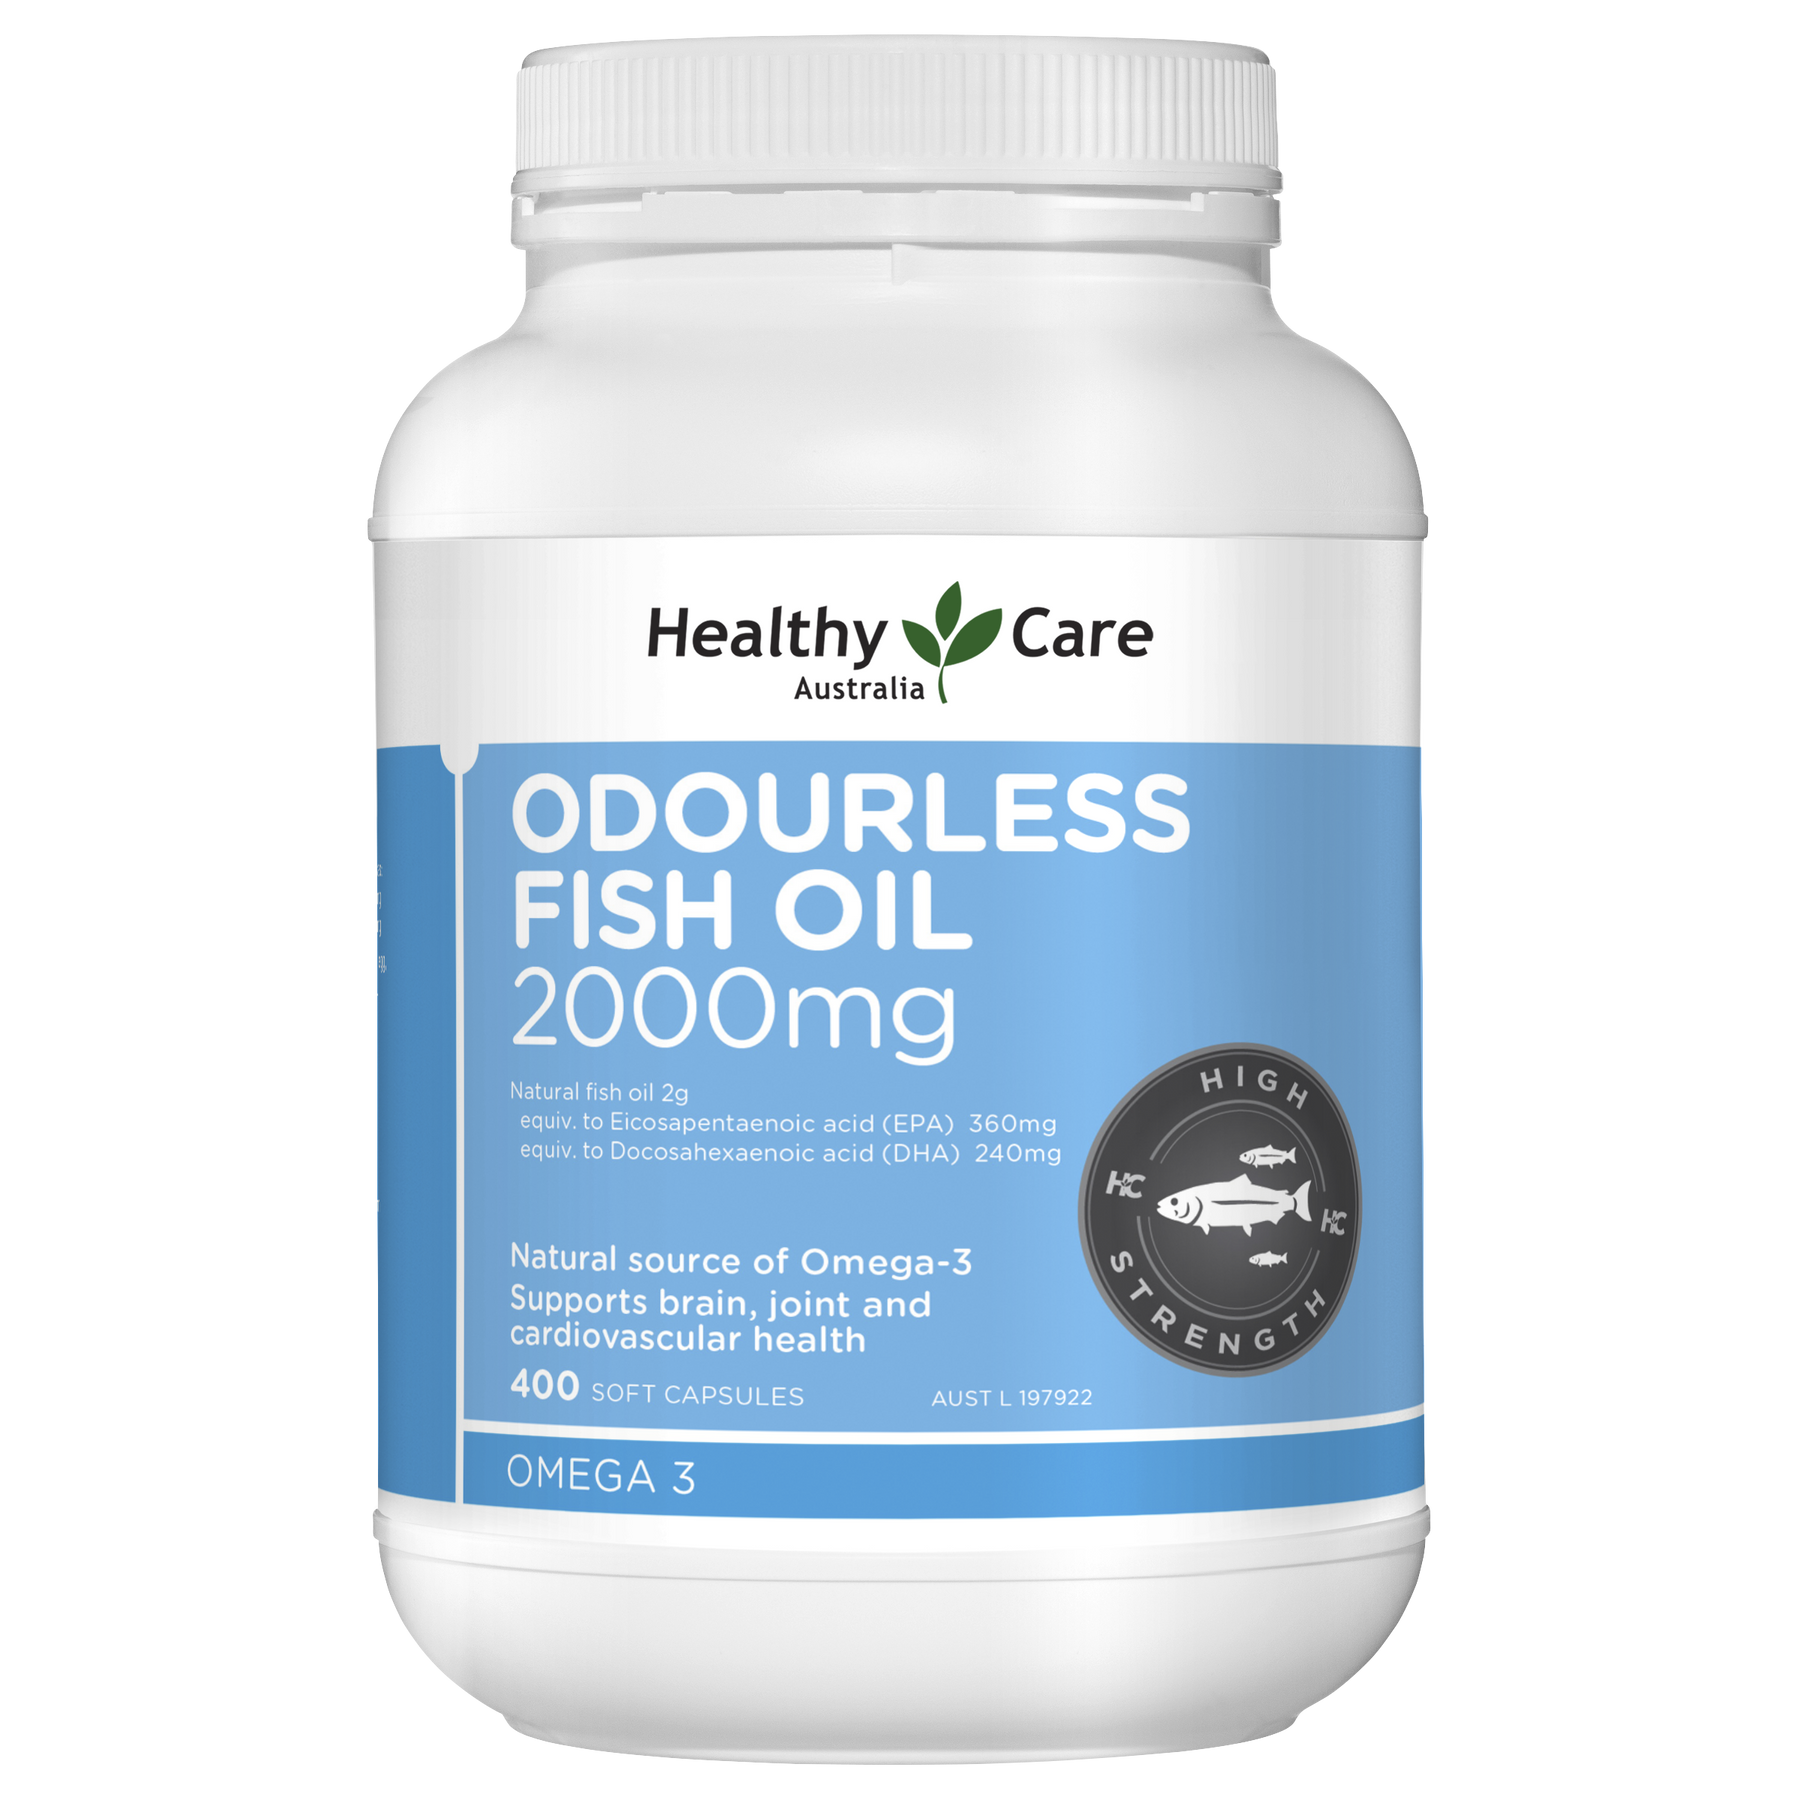 Healthy Care Odourless Fish Oil 2000mg - 400 Capsules